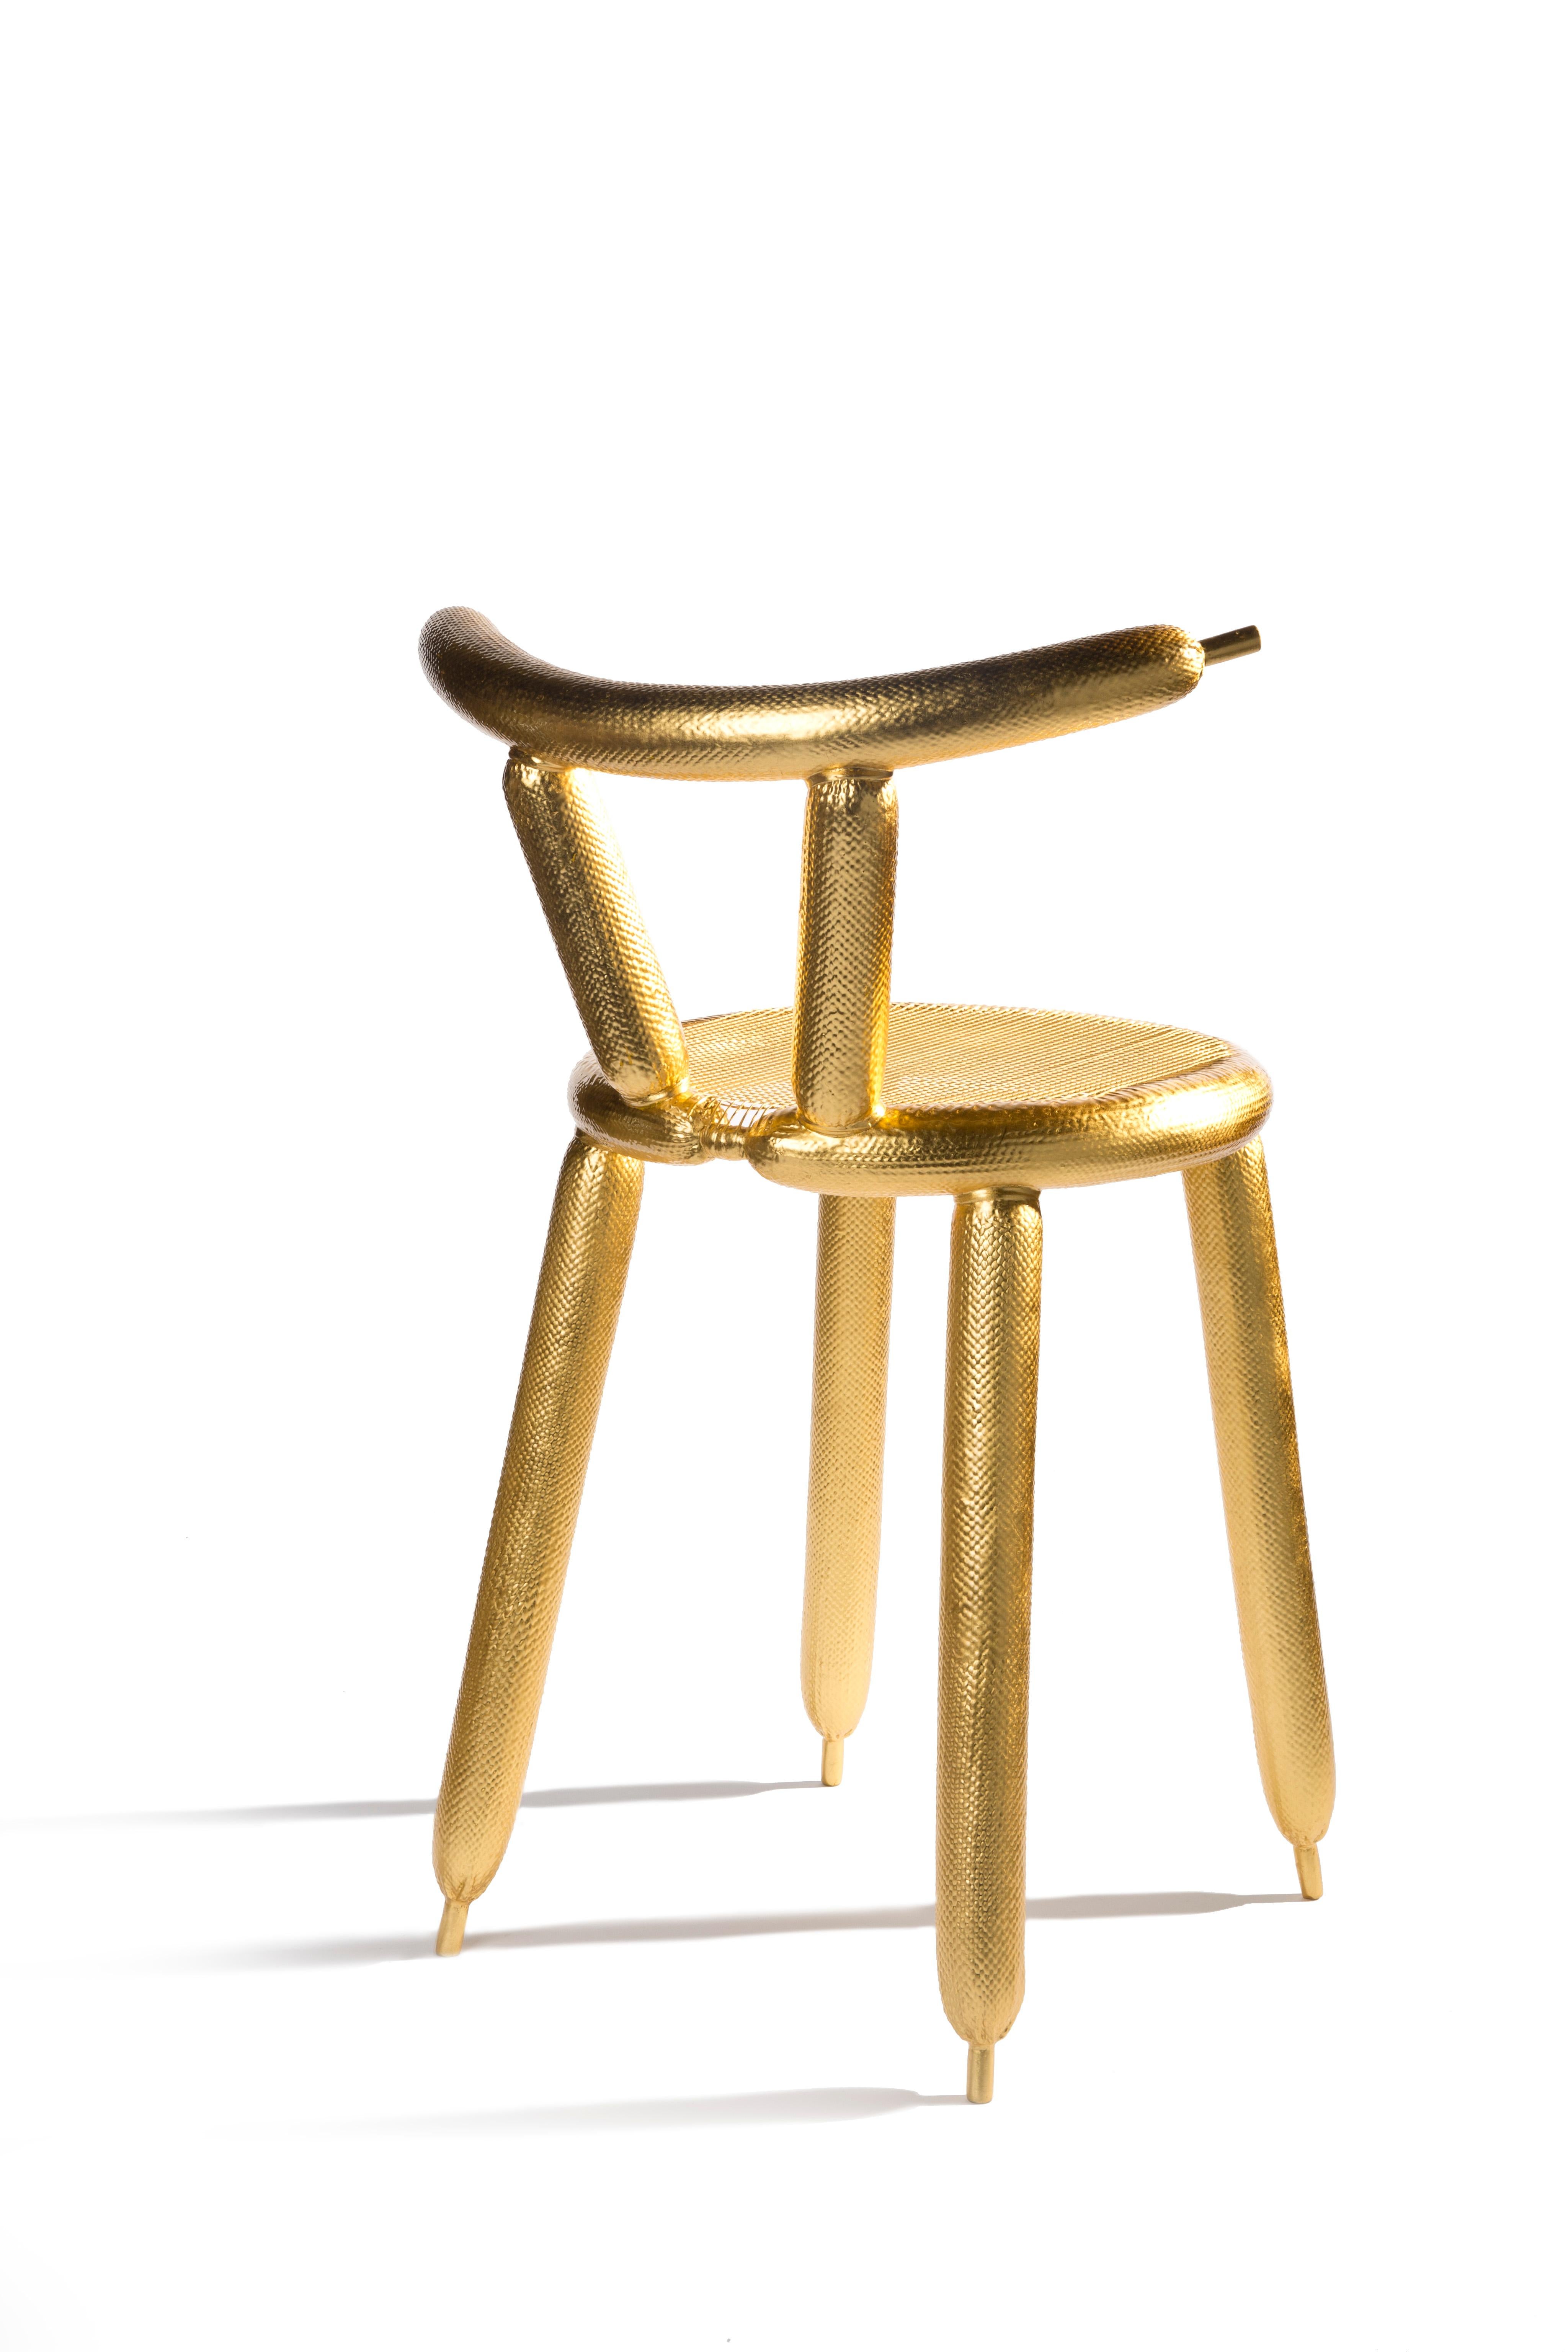 Gold Leaf Carbon Balloon Chair Gold, by Marcel Wanders, 2013, Limited Edition #2/5 For Sale